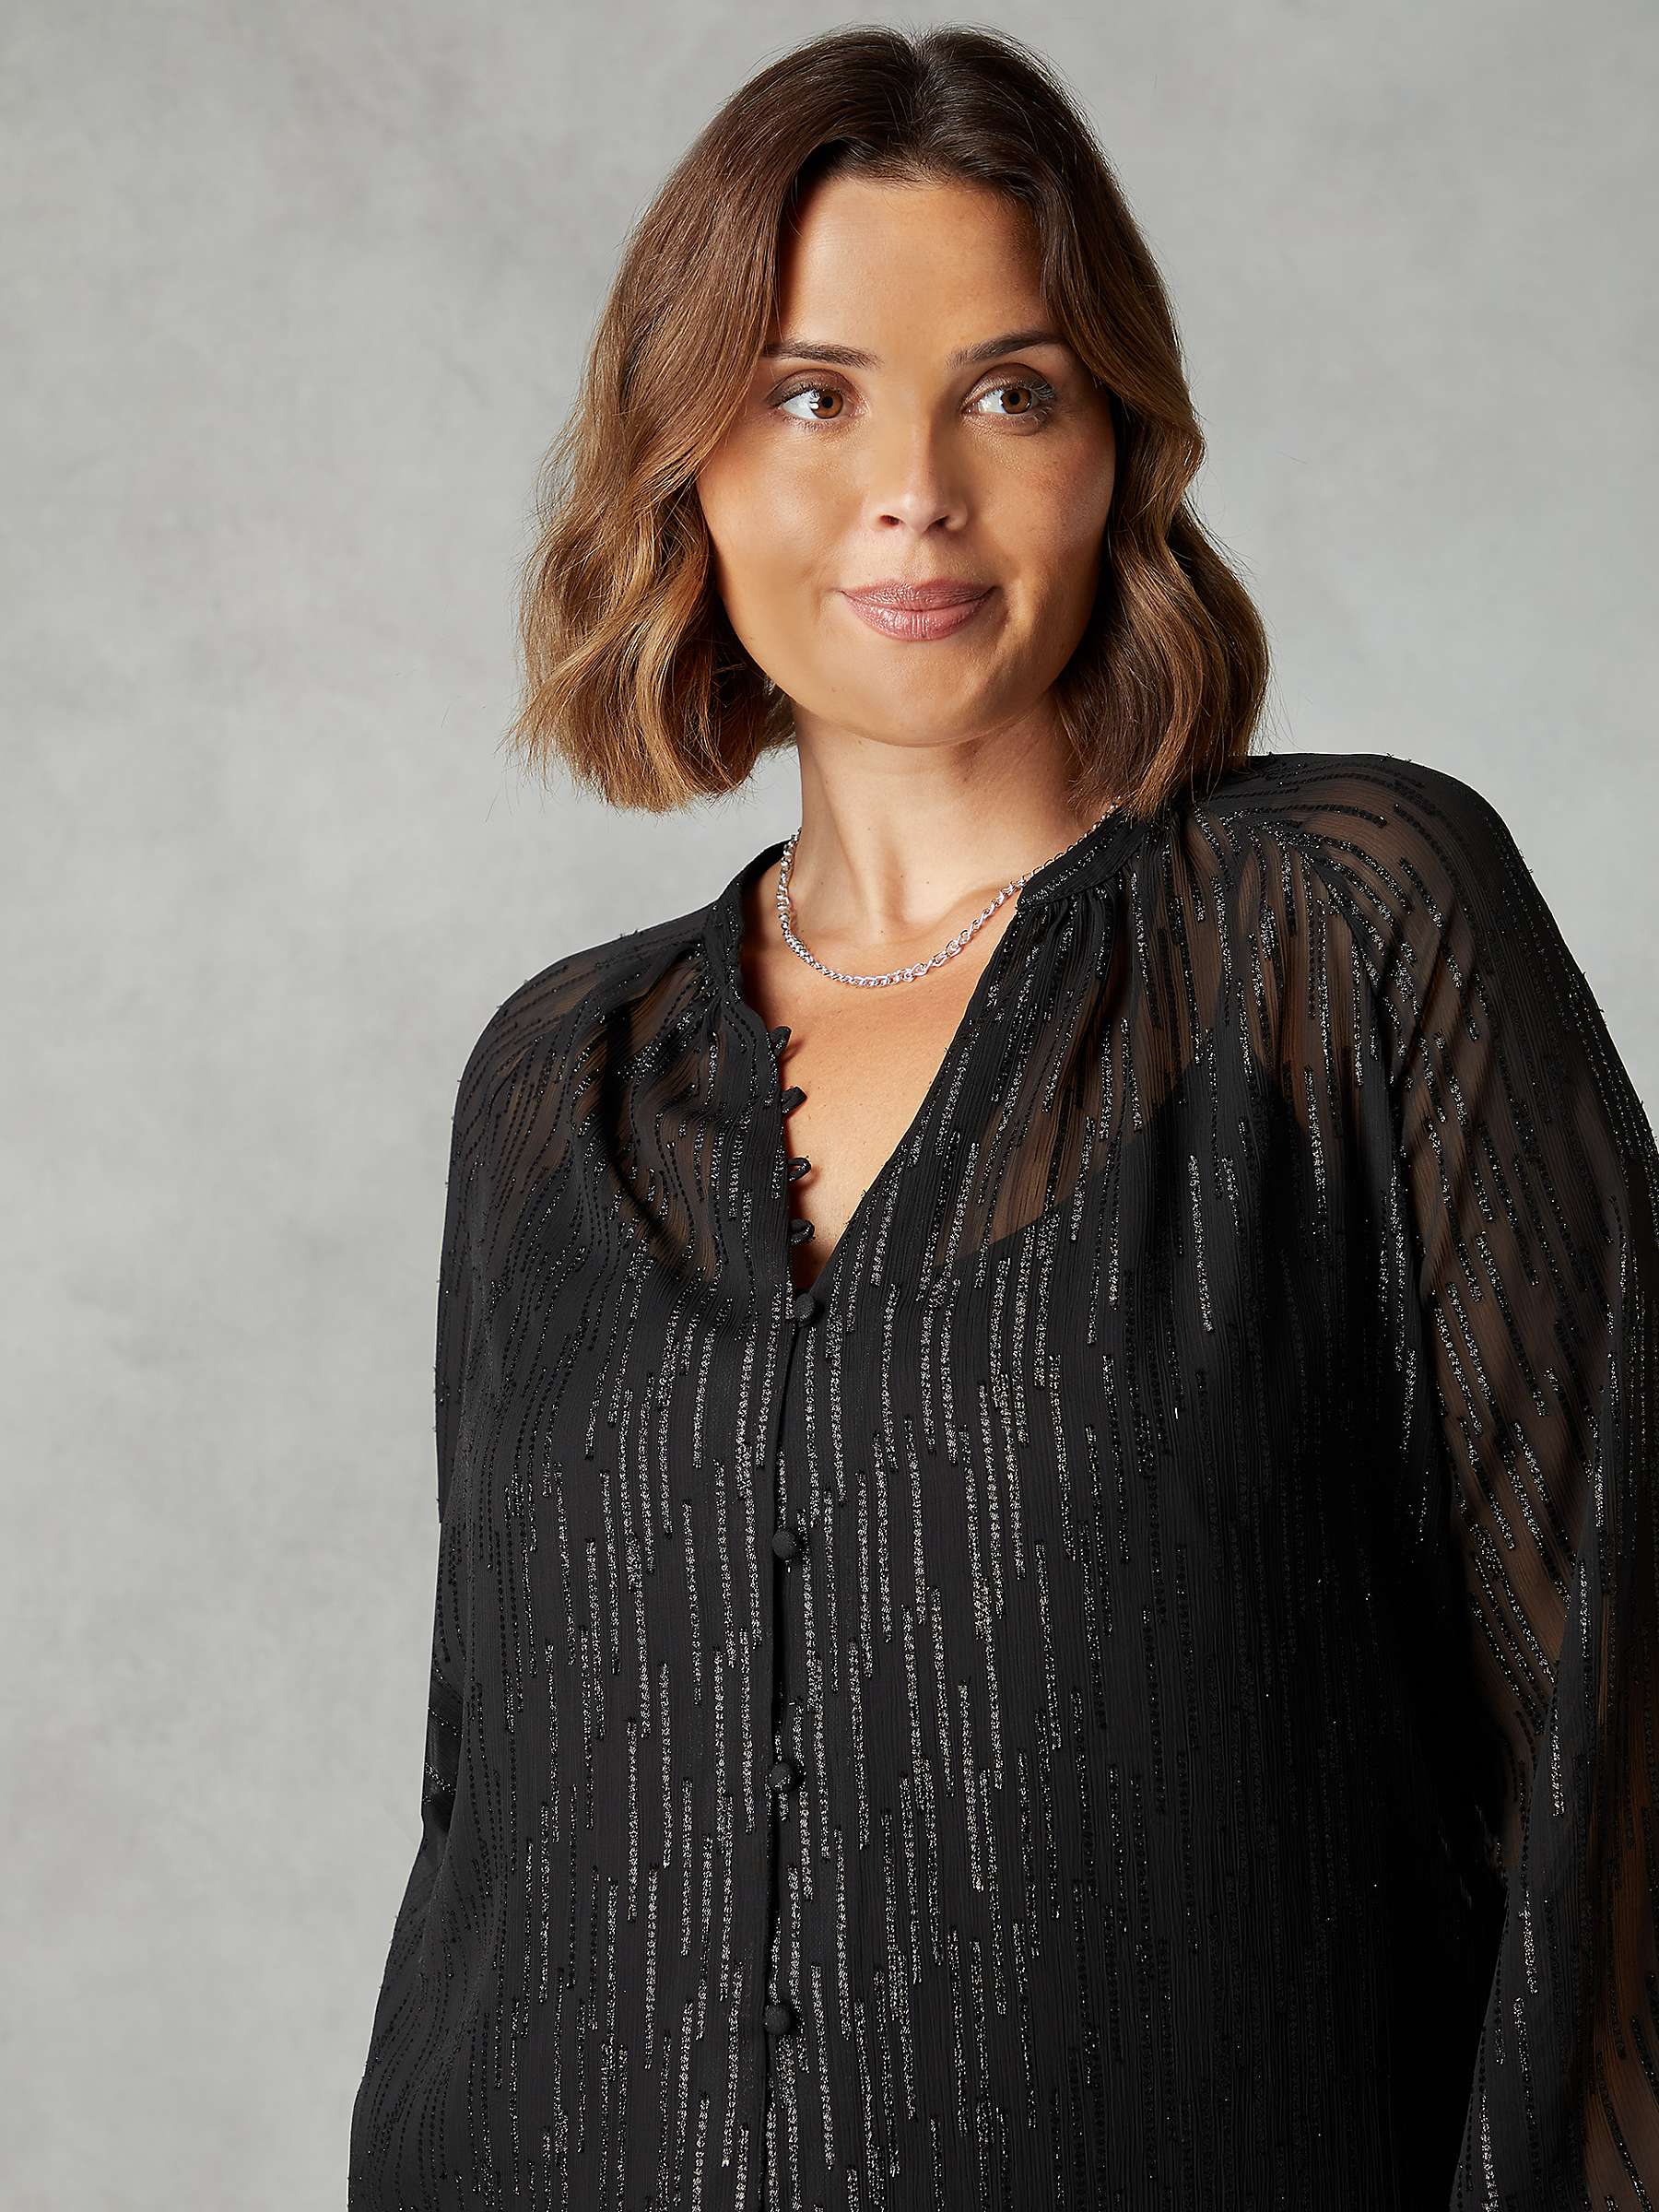 Buy Live Unlimited Shimmer Chiffon Button Through Blouse, Black Online at johnlewis.com